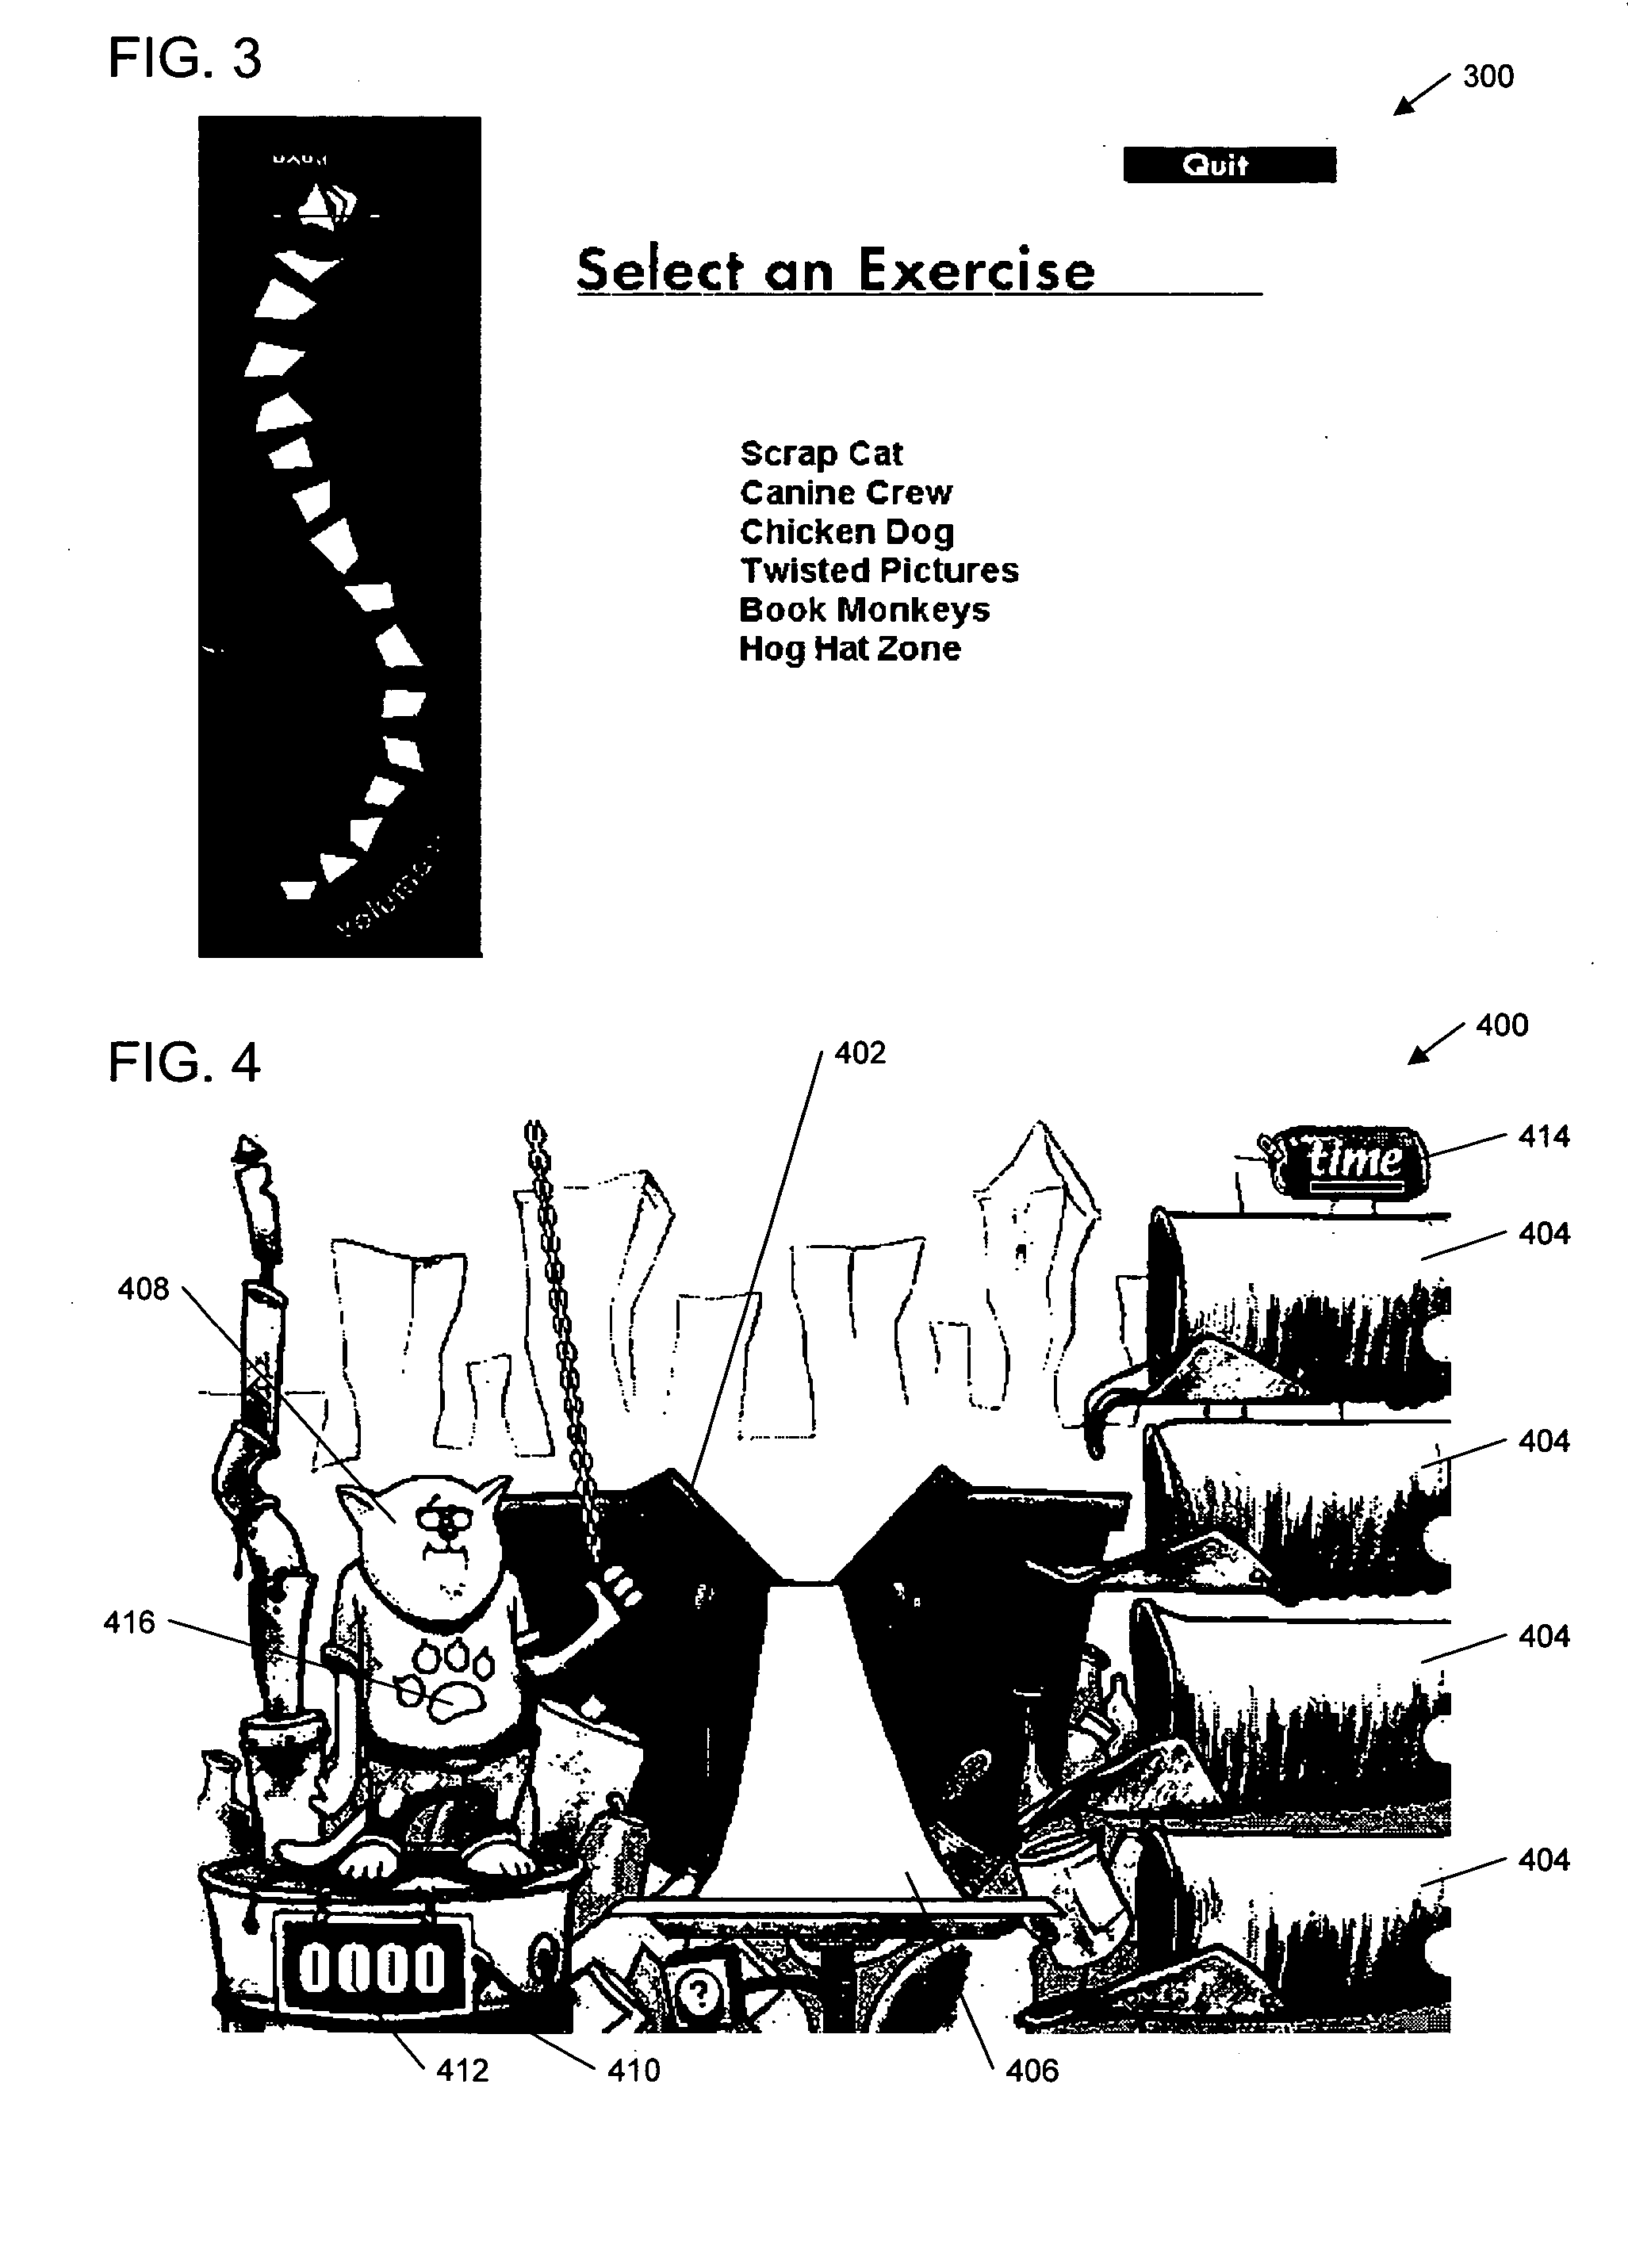 Method and apparatus for automated training of language learning skills